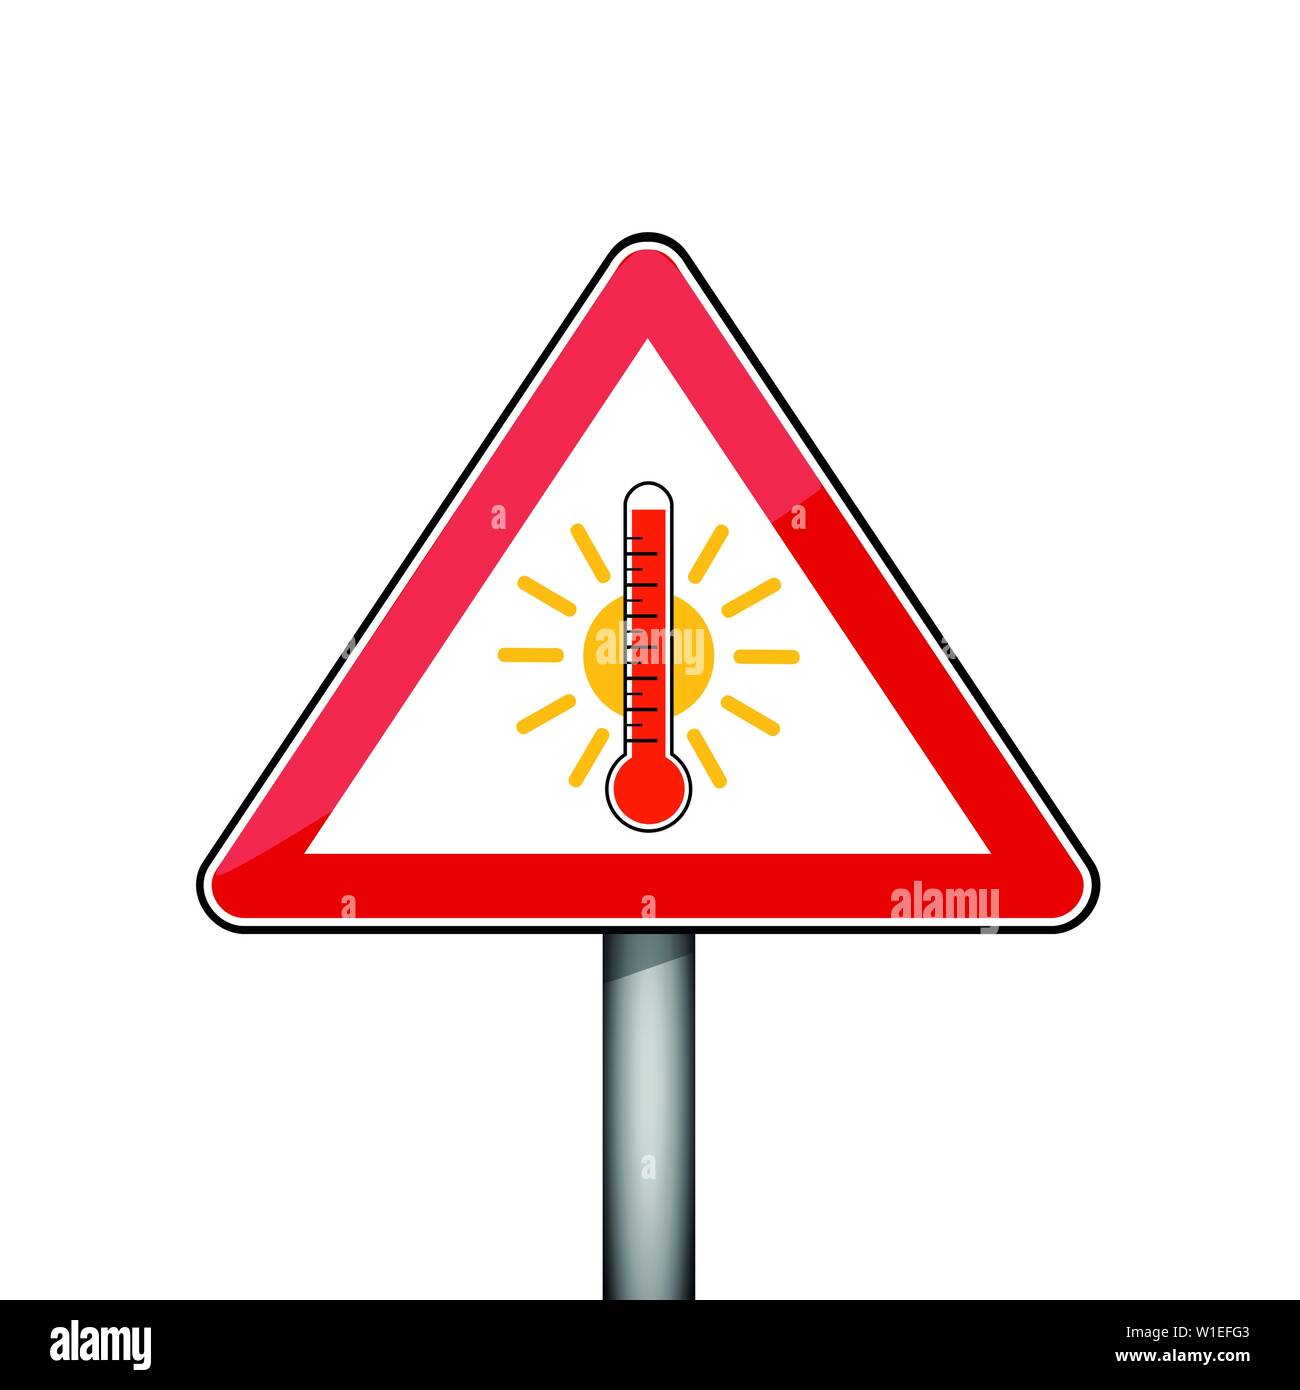 https://c8.alamy.com/comp/W1EFG3/triangular-red-warning-sign-with-heat-thermometer-icon-and-sun-vector-illustration-eps10-W1EFG3.jpg